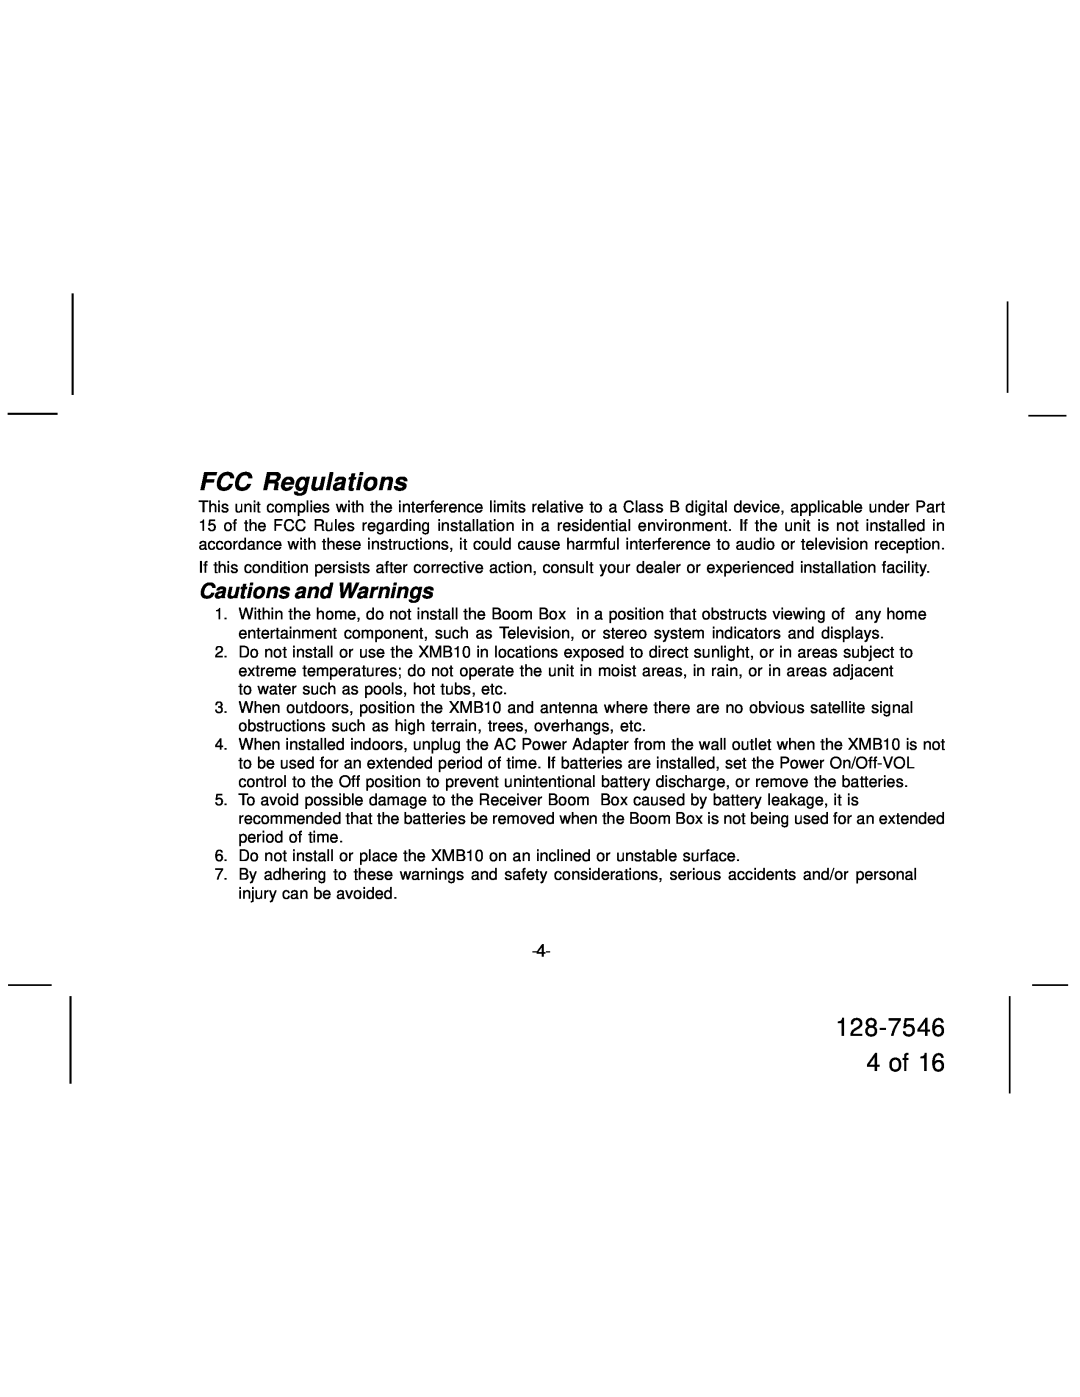 Audiovox XMB10 manual FCC Regulations, 128-7546 4 of, Cautions and Warnings 